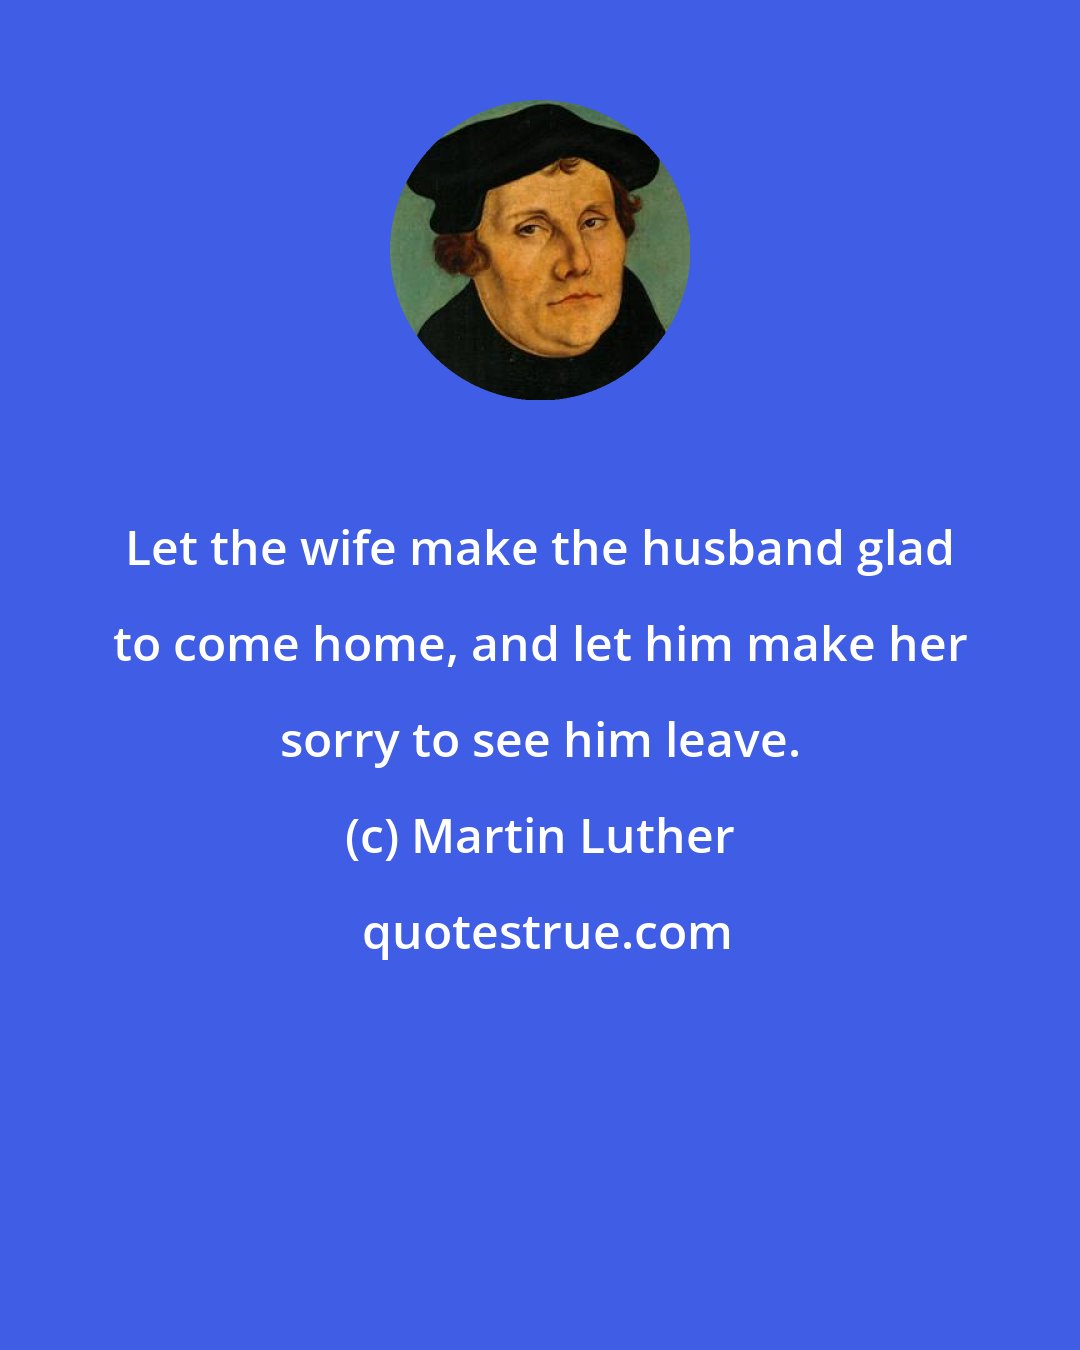 Martin Luther: Let the wife make the husband glad to come home, and let him make her sorry to see him leave.